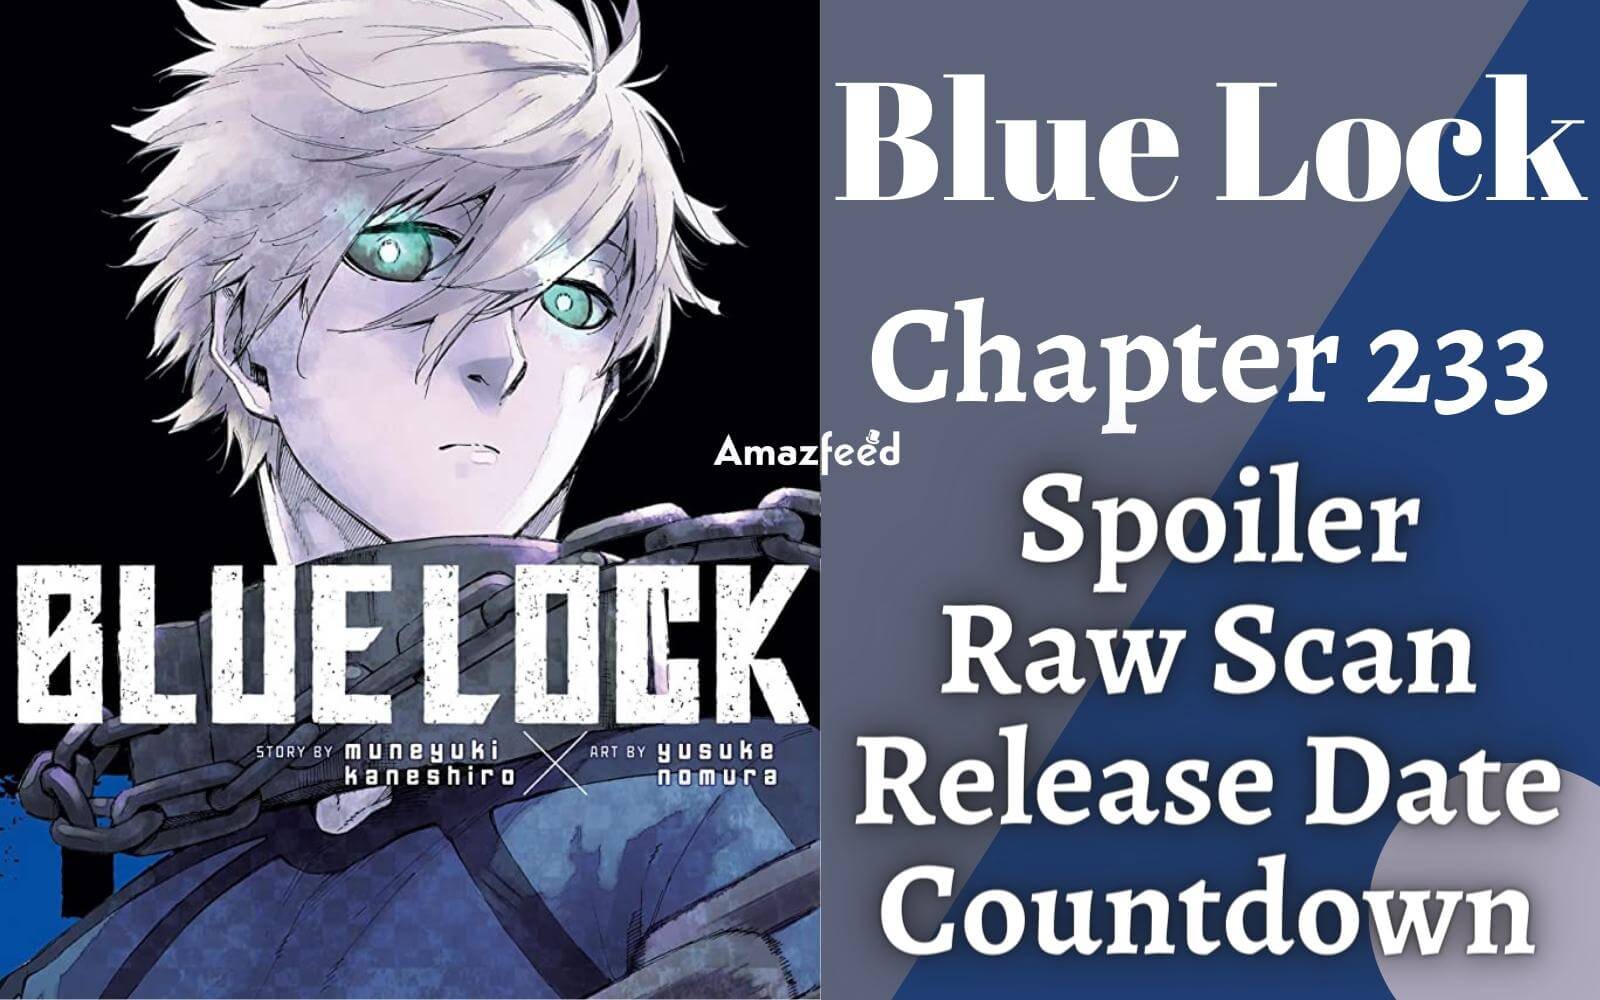 Comment how excited your are for the new season of blue lock #bluelock, blue  lock season 2 release date